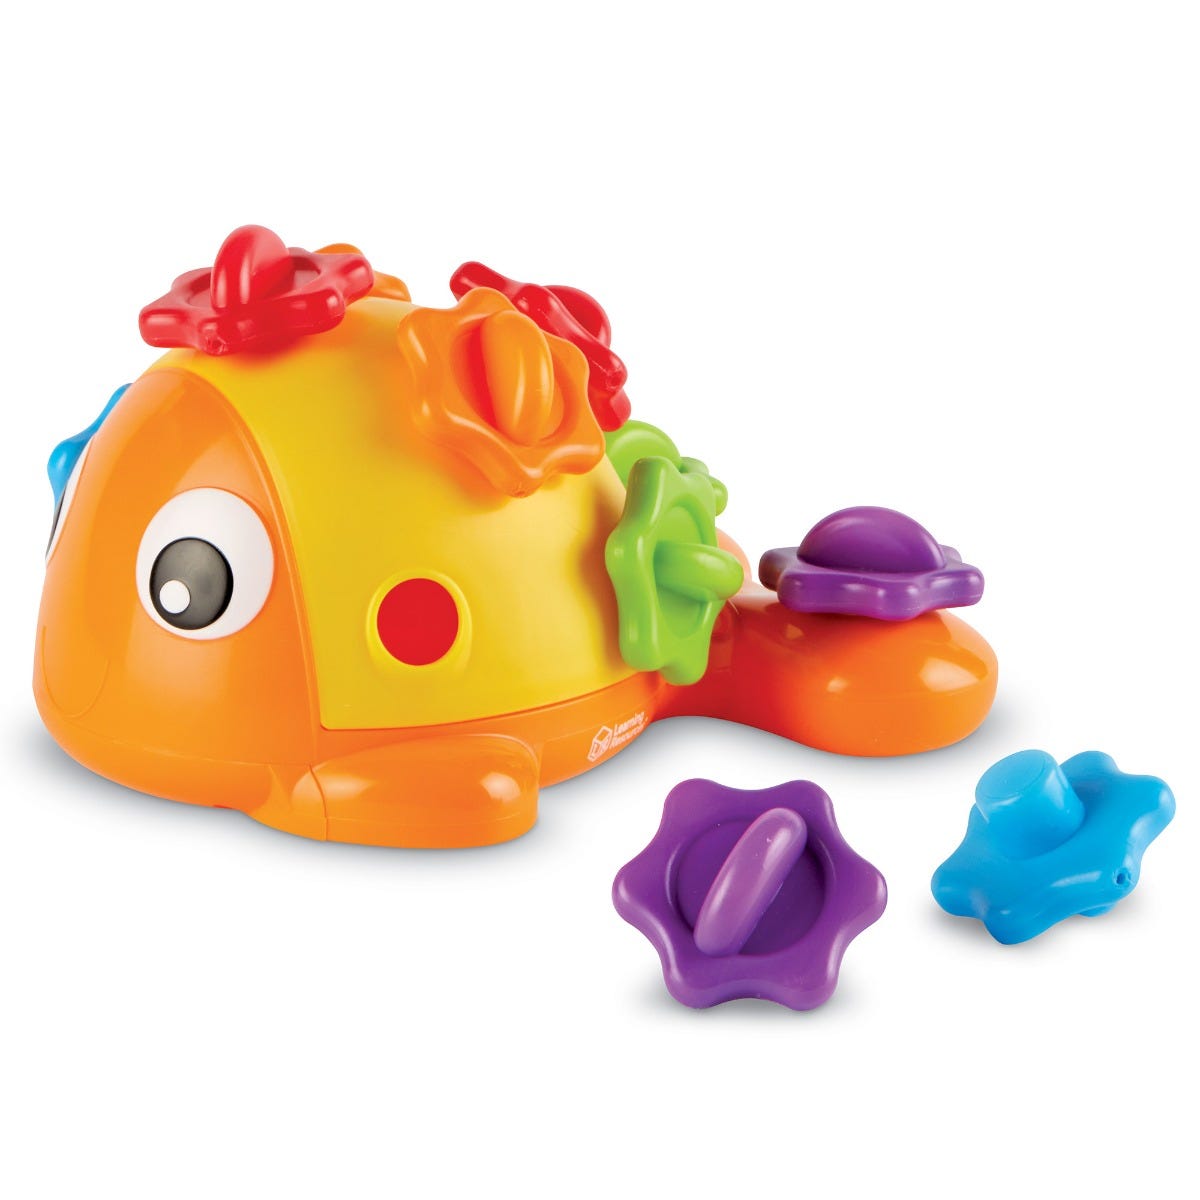 Finn the Fine Motor Fish, Meet Finn the Fine Motor Fish, the splashy, splashy fine motor toy that helps children build hand strength they need to succeed in school and beyond. This colourful Finn the Fine Motor Fish comes with 12 pinchable, pullable scales featuring indented surfaces that help children build pincer grasp skills, hand strength, wrist rotation and other whole-hand fine motor skills essentials. Finn the Fine Motor Fish Finn the Fine Motor Fish is a fun aquatic-themed fine motor toy that’s read